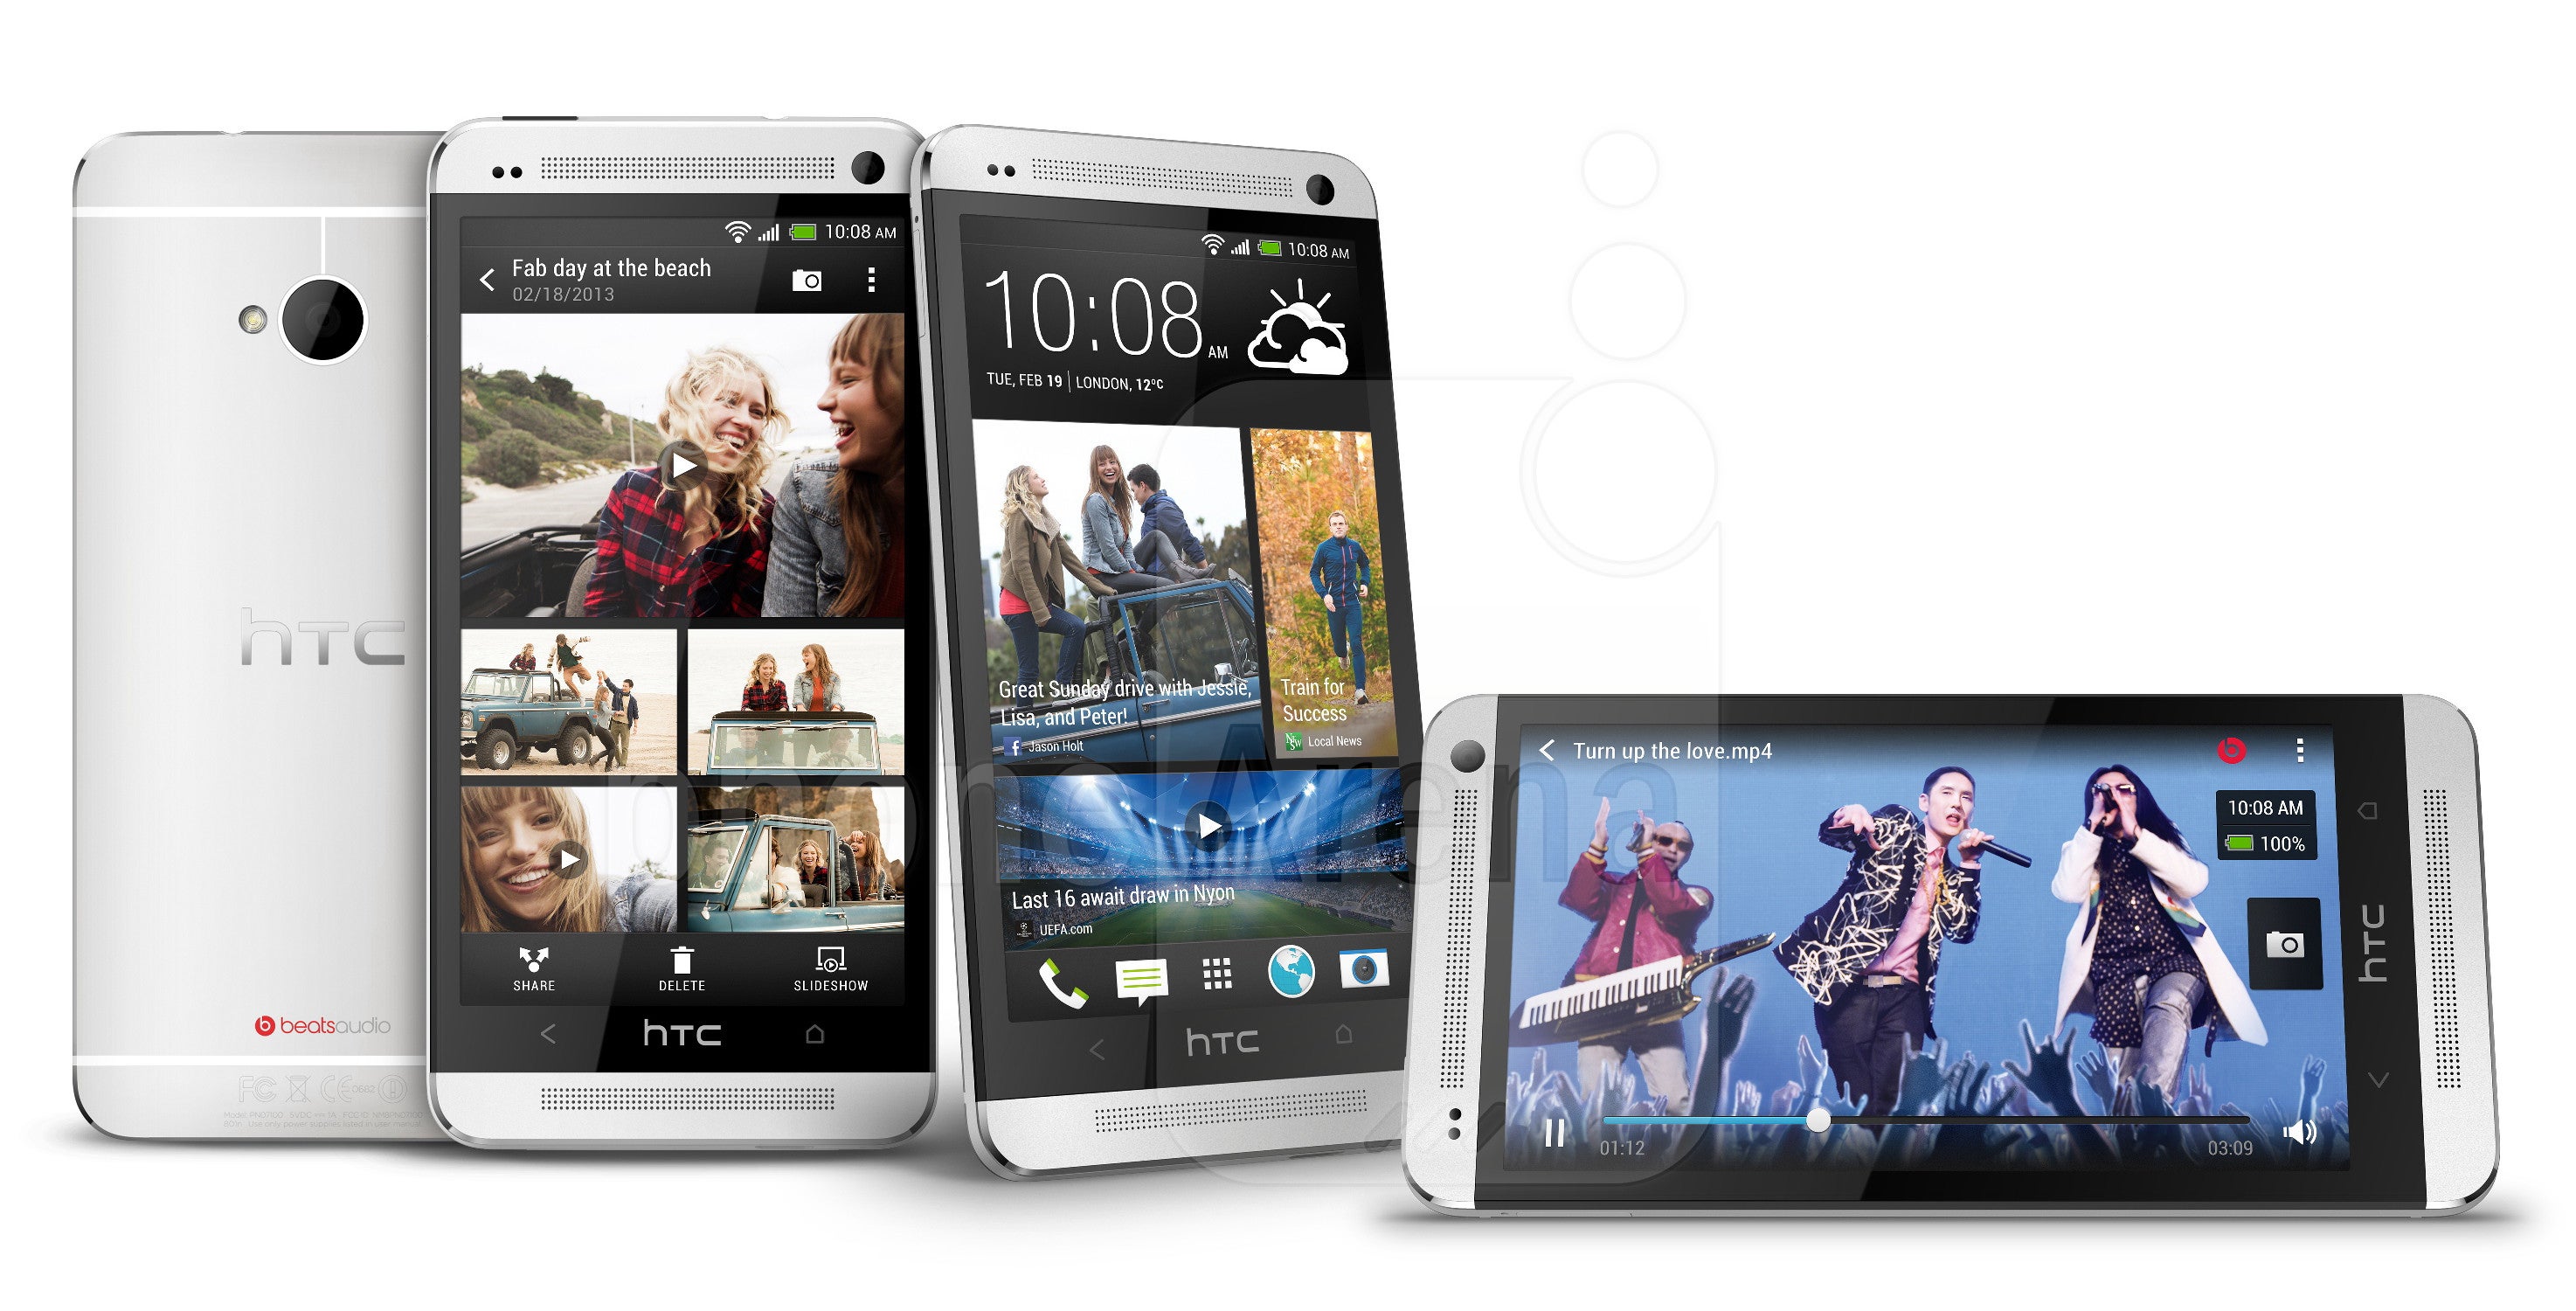 HTC: A brief history in solid handset designs